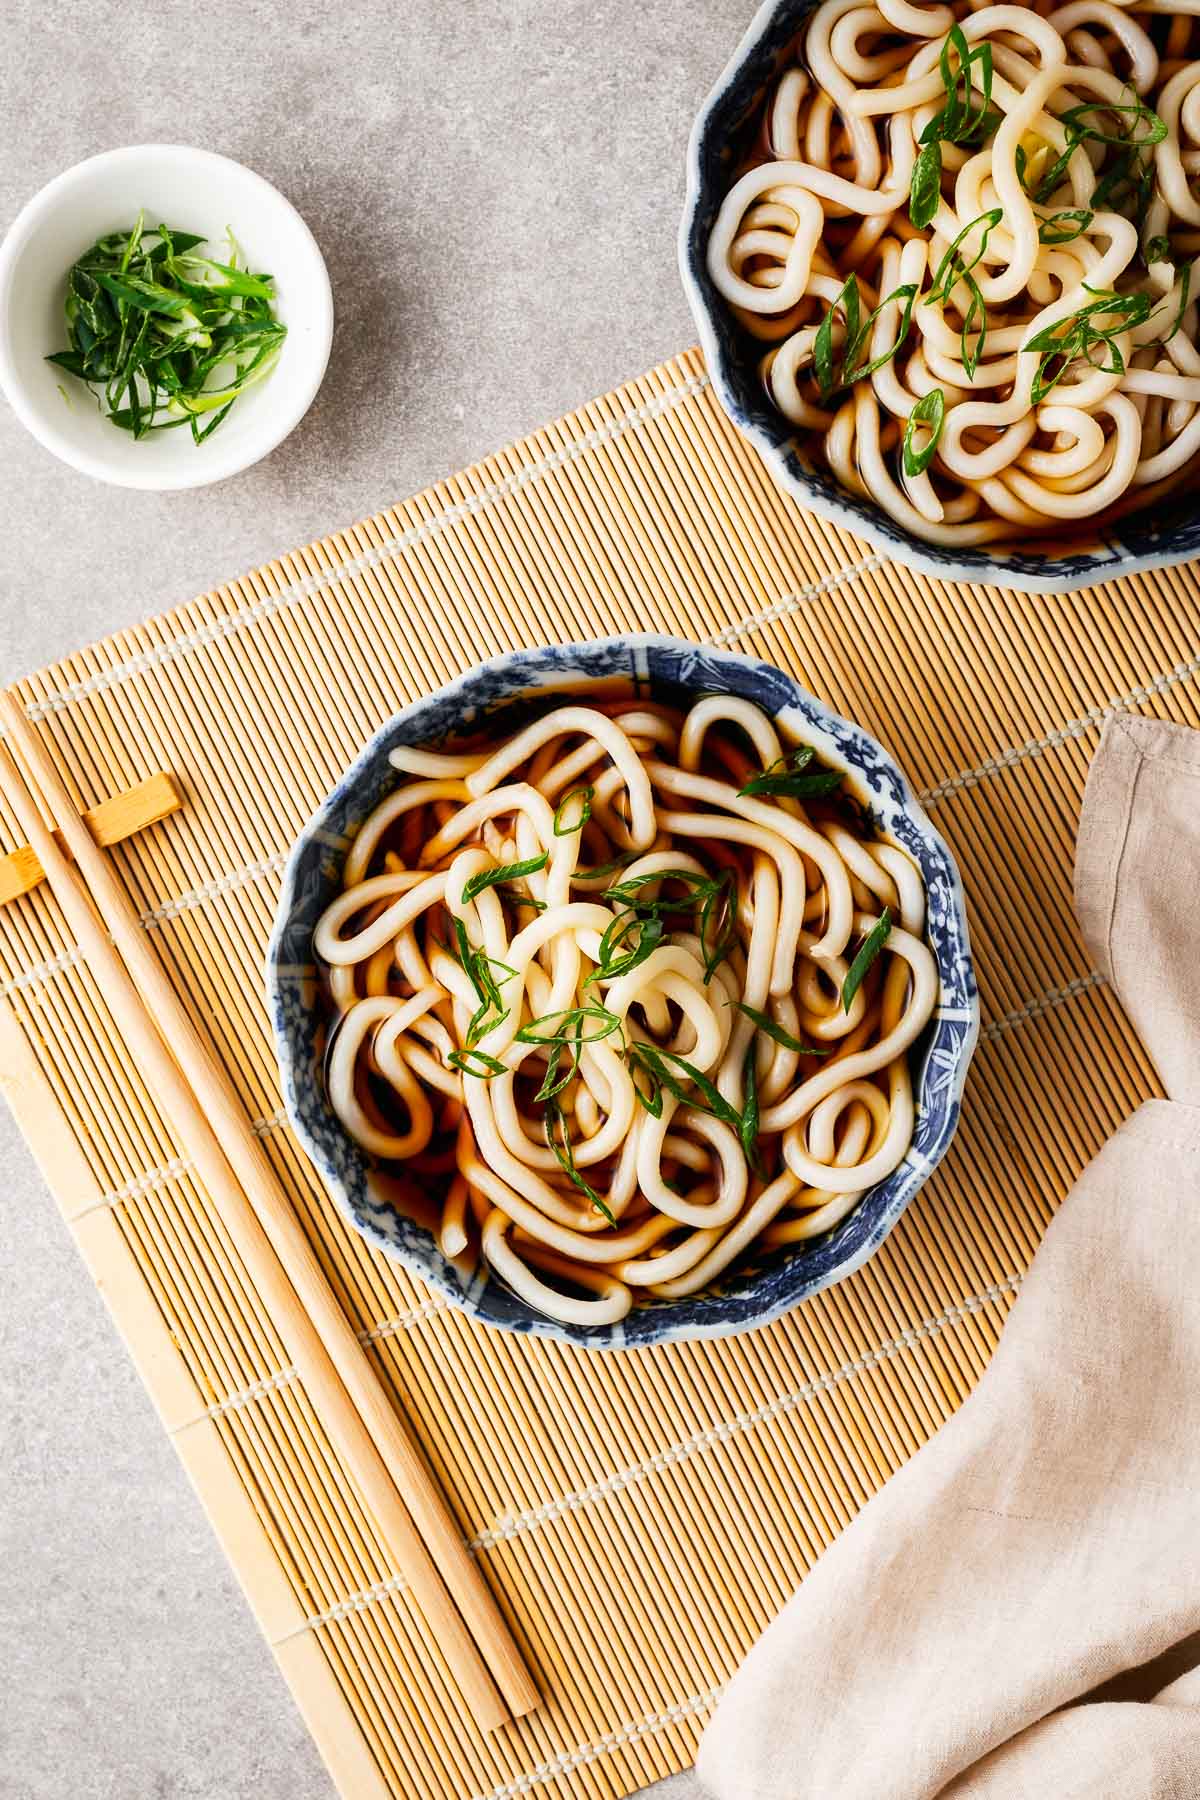 Kake udon in Japanese ceramic bowls topped simply with sliced green onions.